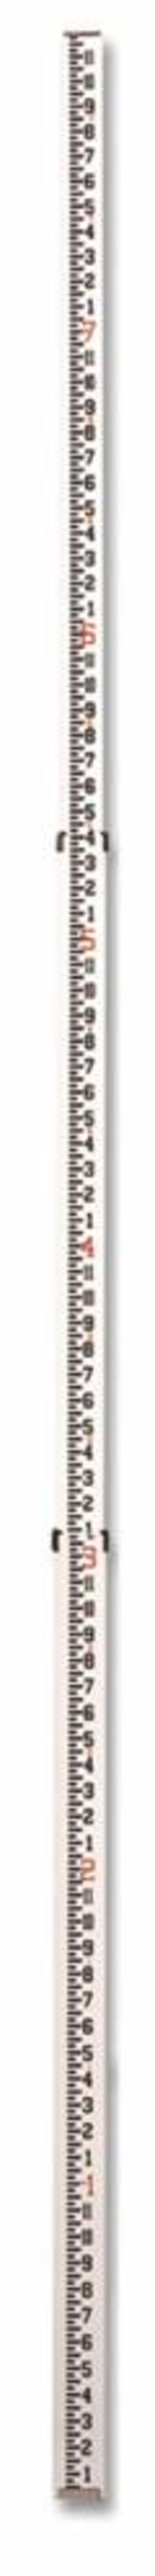 CST Berger 8 Ft. Aluminum Telescoping Rod 3-Section Inches / 8ths